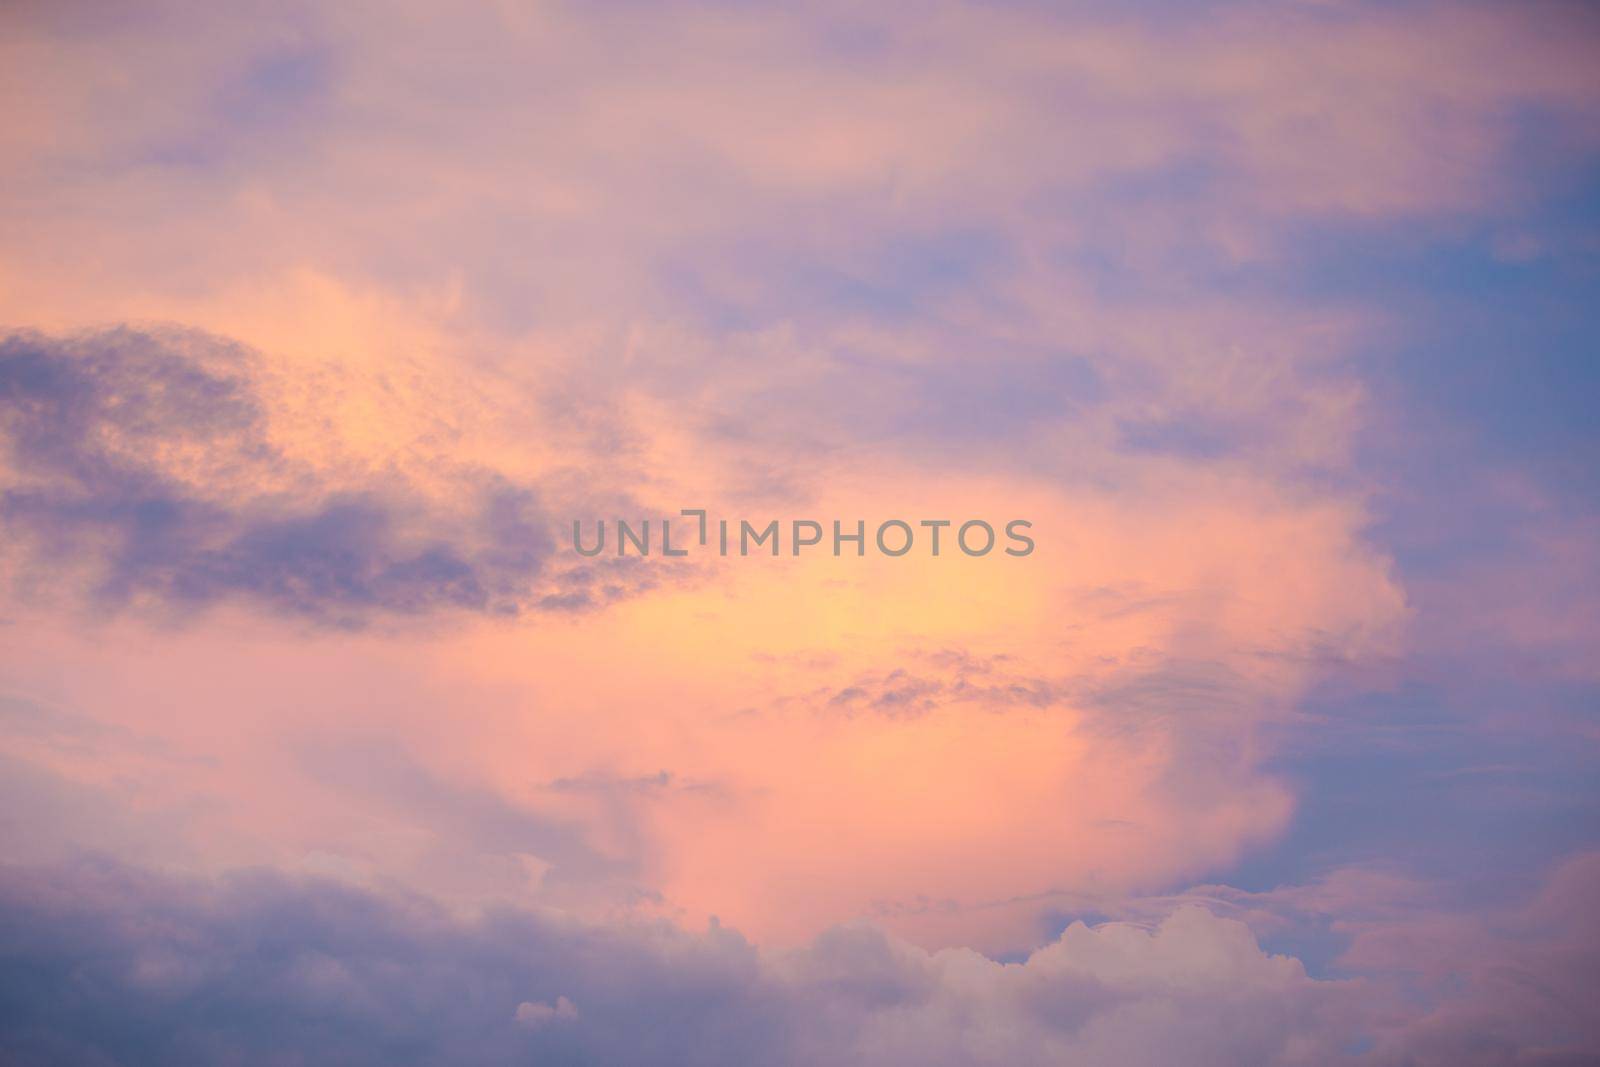 Sunset sky with colorful clouds. Blue colors merge with soft orange by Yurich32